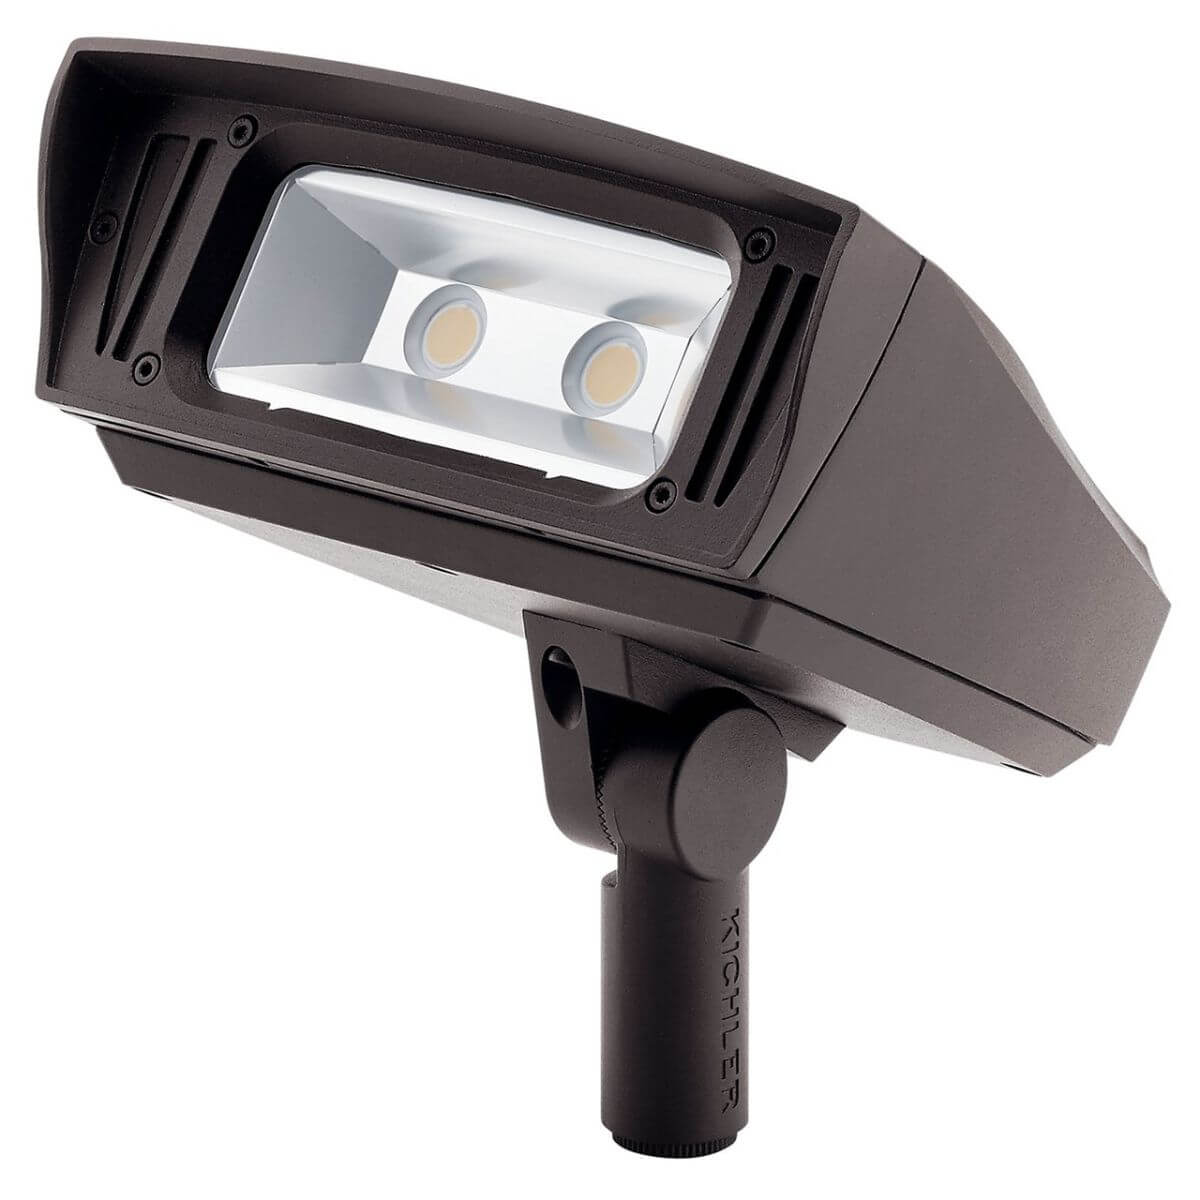 LED 6 inch Outdoor Flood Light in Bronze - 233601